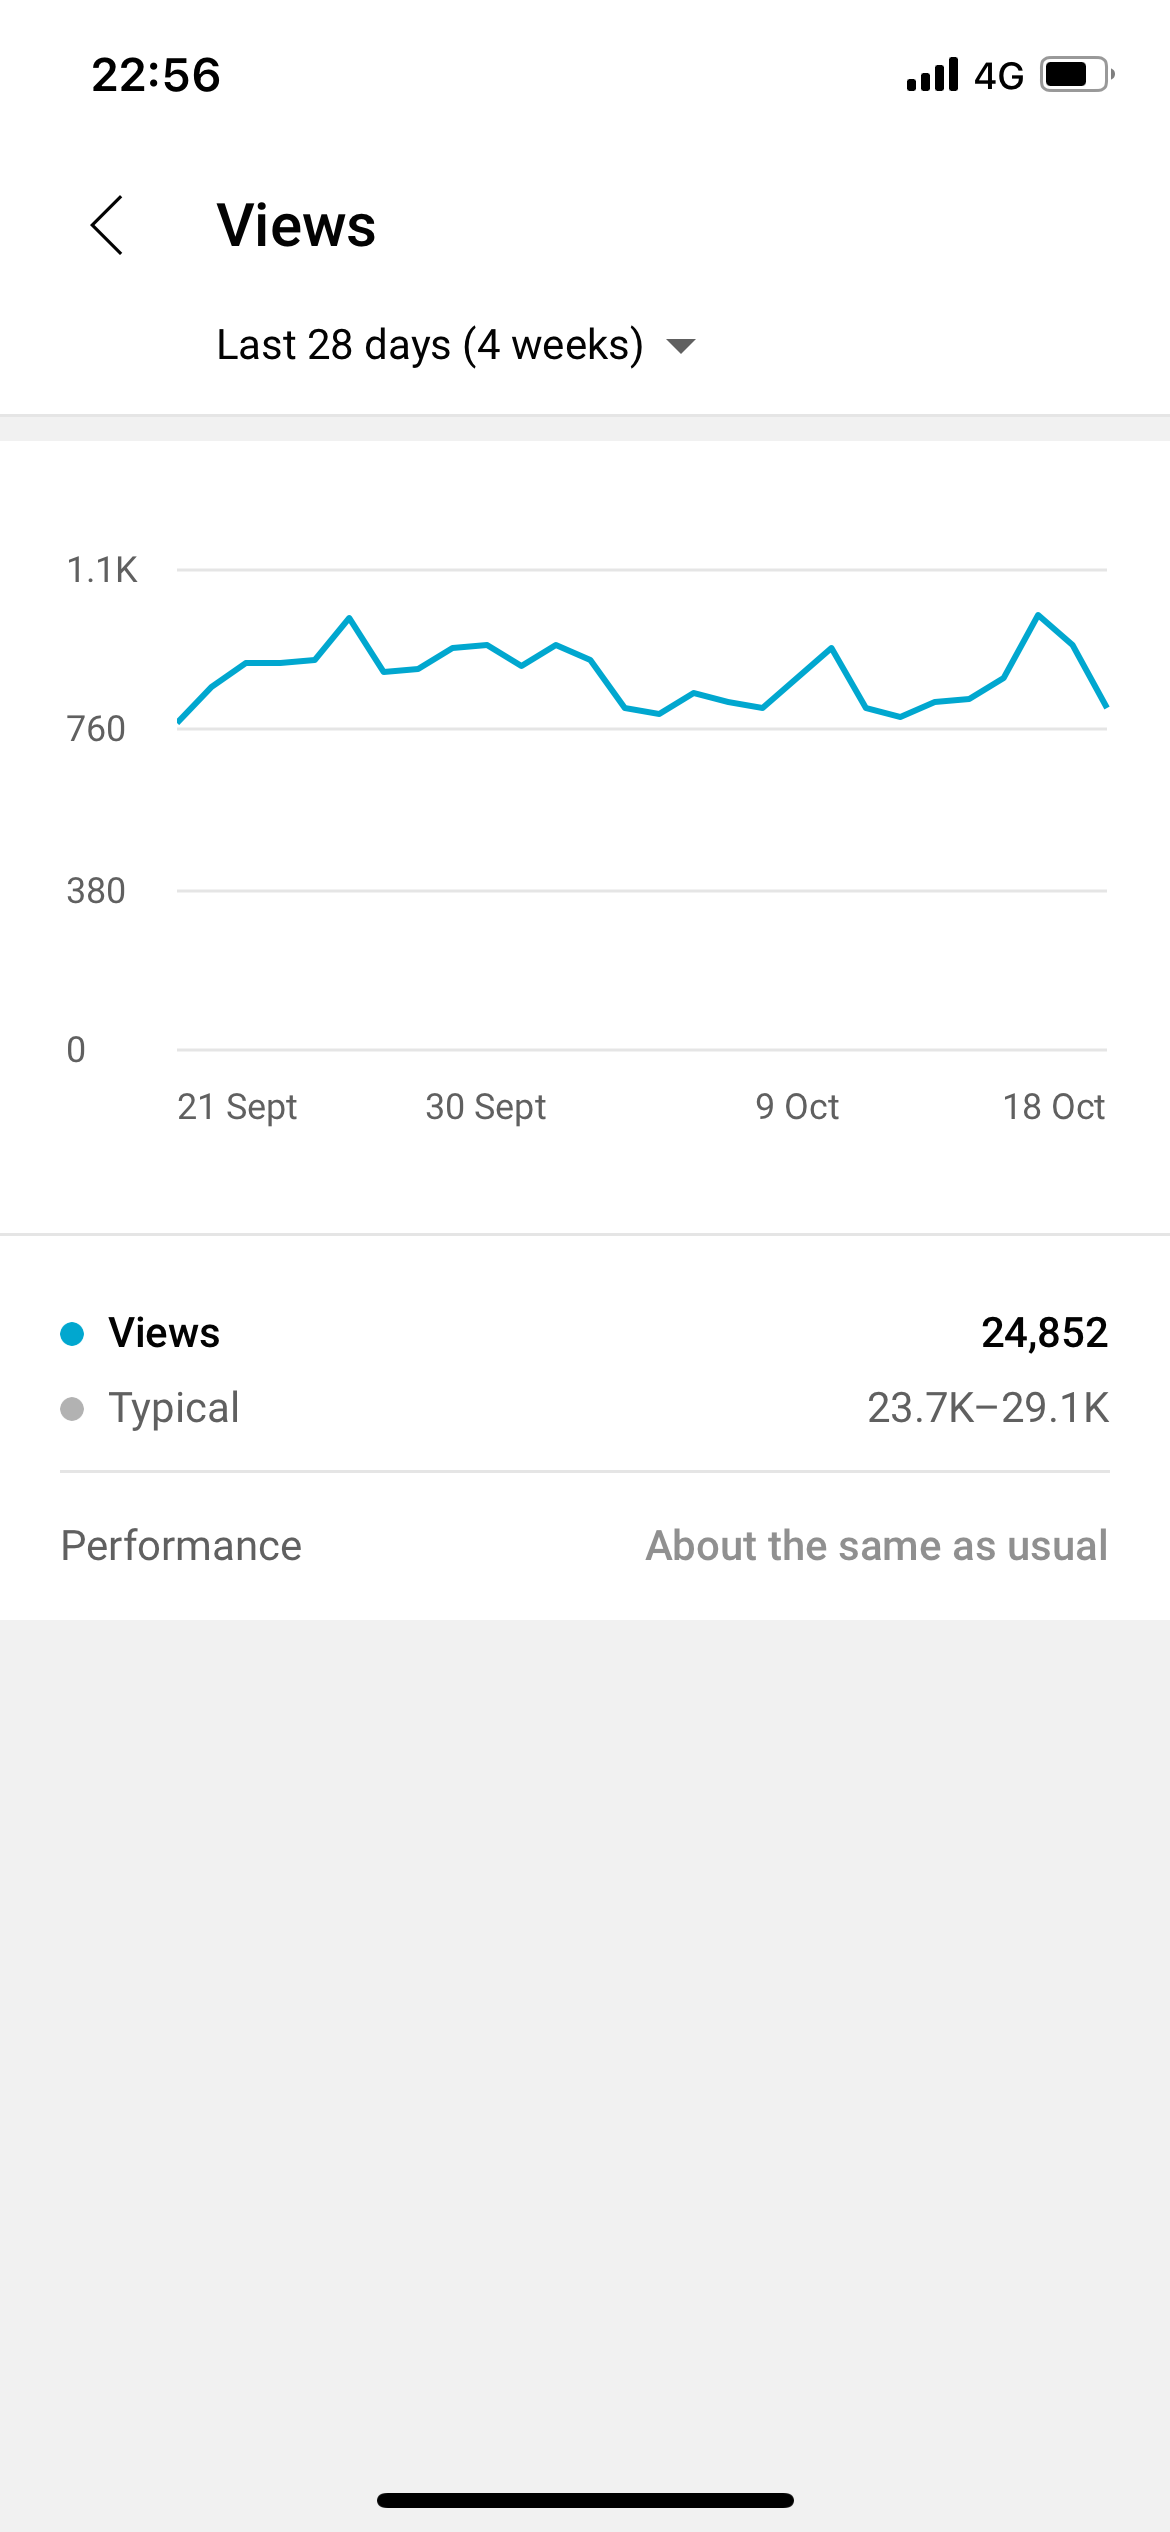 YouTube Studio App Screenshot showing channel views for the last 28 days